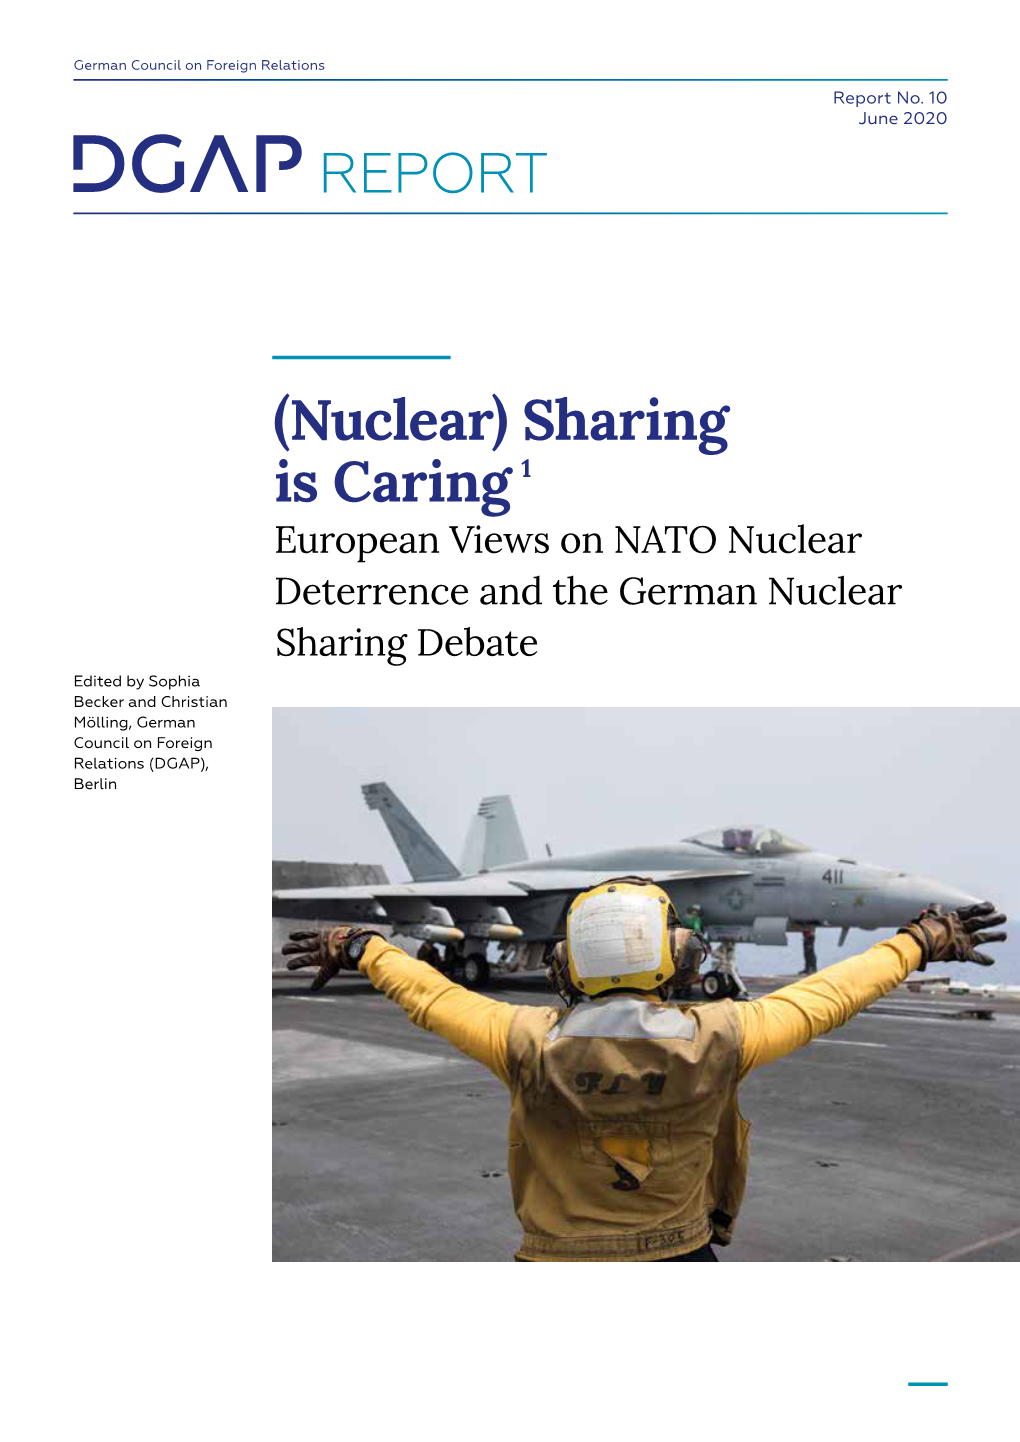 Nuclear Sharing Is Caring